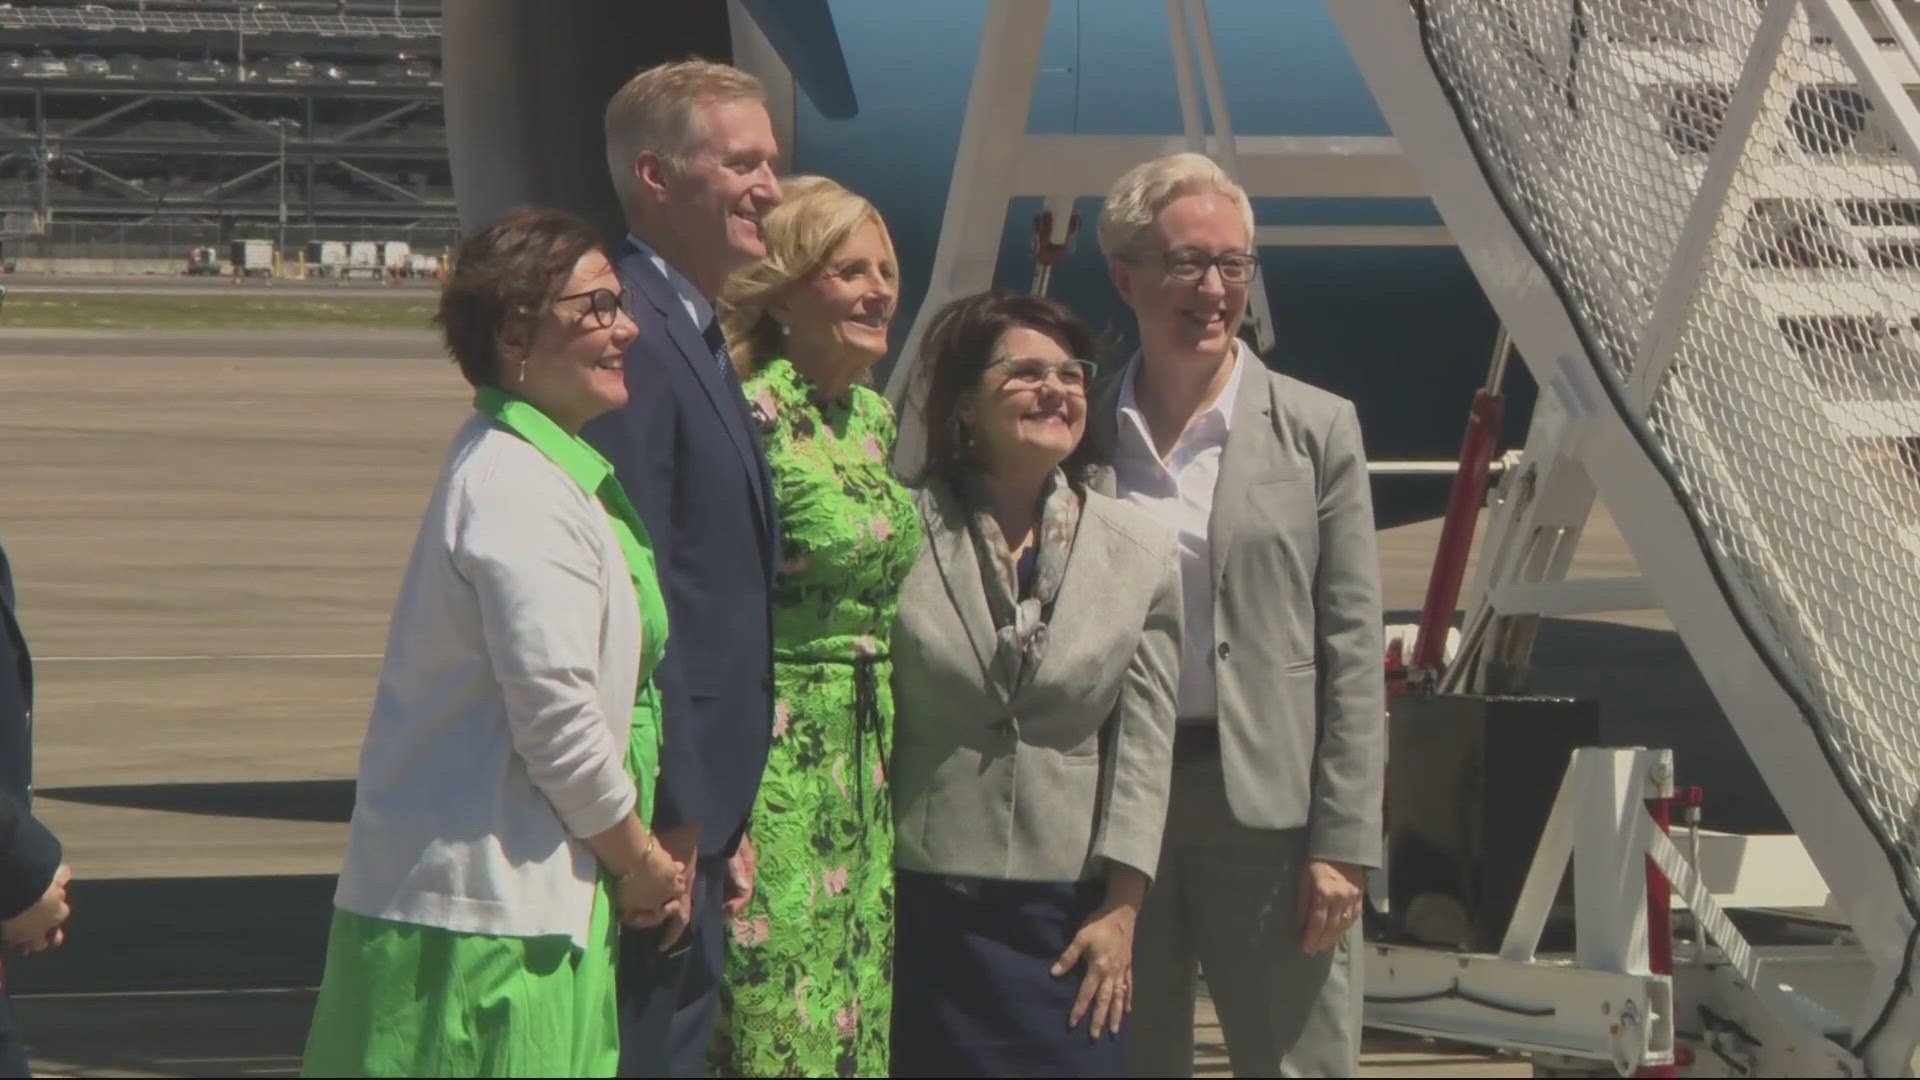 The first lady's visit comes about a week before the Oregon primary election. She met with Gov. Kotek, Mayor Wheeler and Multnomah County Chair Vega Pederson.